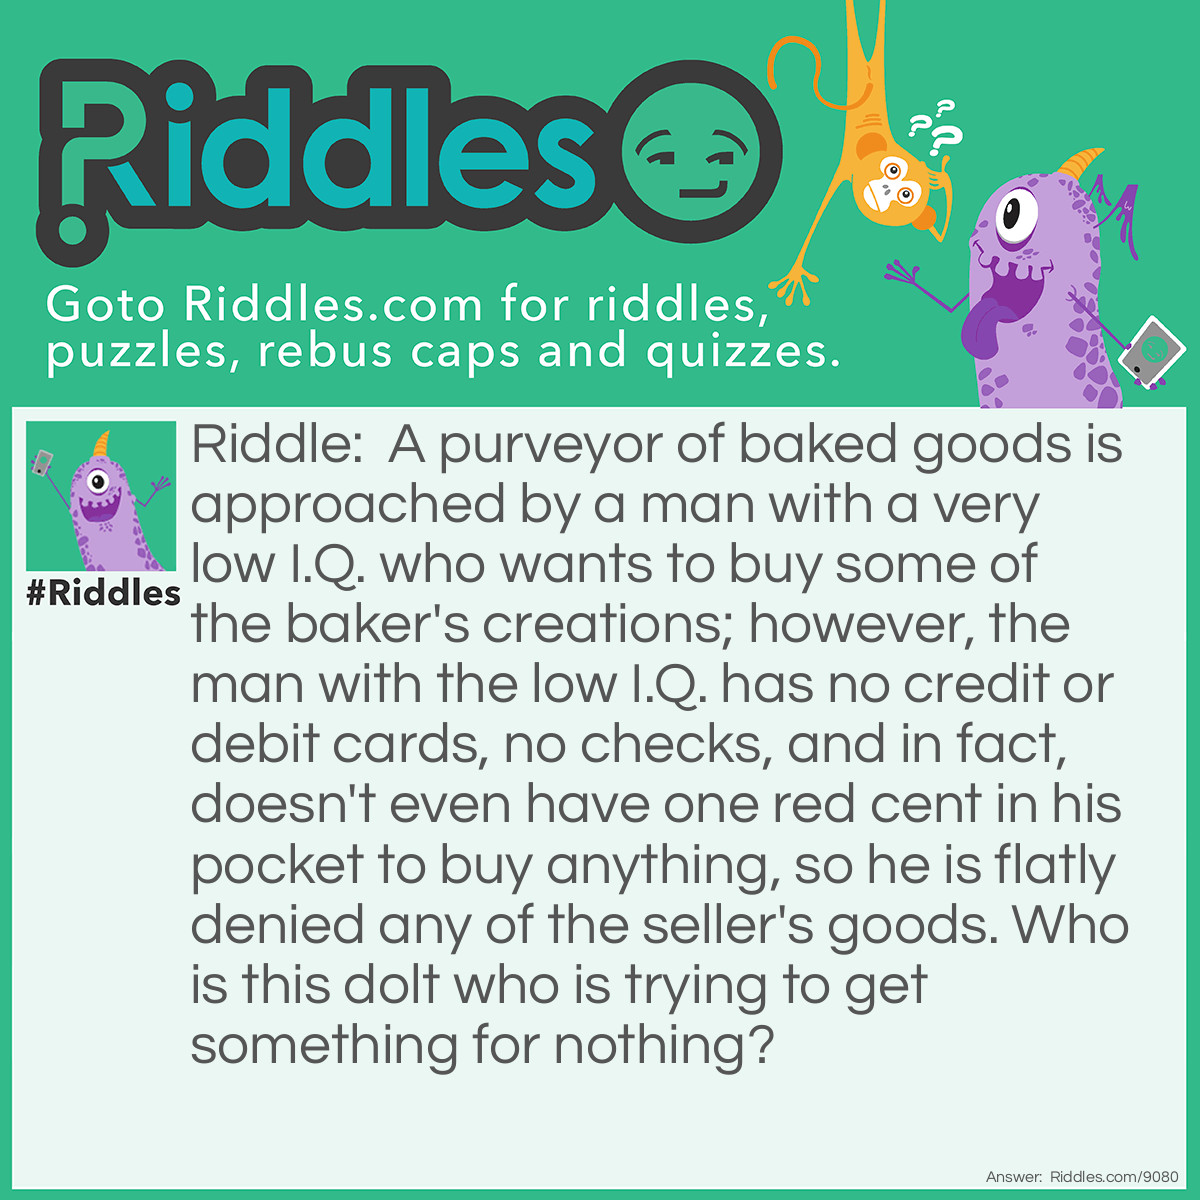 Riddle: A purveyor of baked goods is approached by a man with a very low I.Q. who wants to buy some of the baker's creations; however, the man with the low I.Q. has no credit or debit cards, no checks, and in fact, doesn't even have one red cent in his pocket to buy anything, so he is flatly denied any of the seller's goods. Who is this dolt who is trying to get something for nothing? Answer: Simple Simon met a pieman going to the fair. Says Simple Simon to the pieman, "Let me taste your ware." Says the pieman to Simple Simon, "Show me first your penny." Says Simple Simon to the pieman, "Indeed, I have not any."